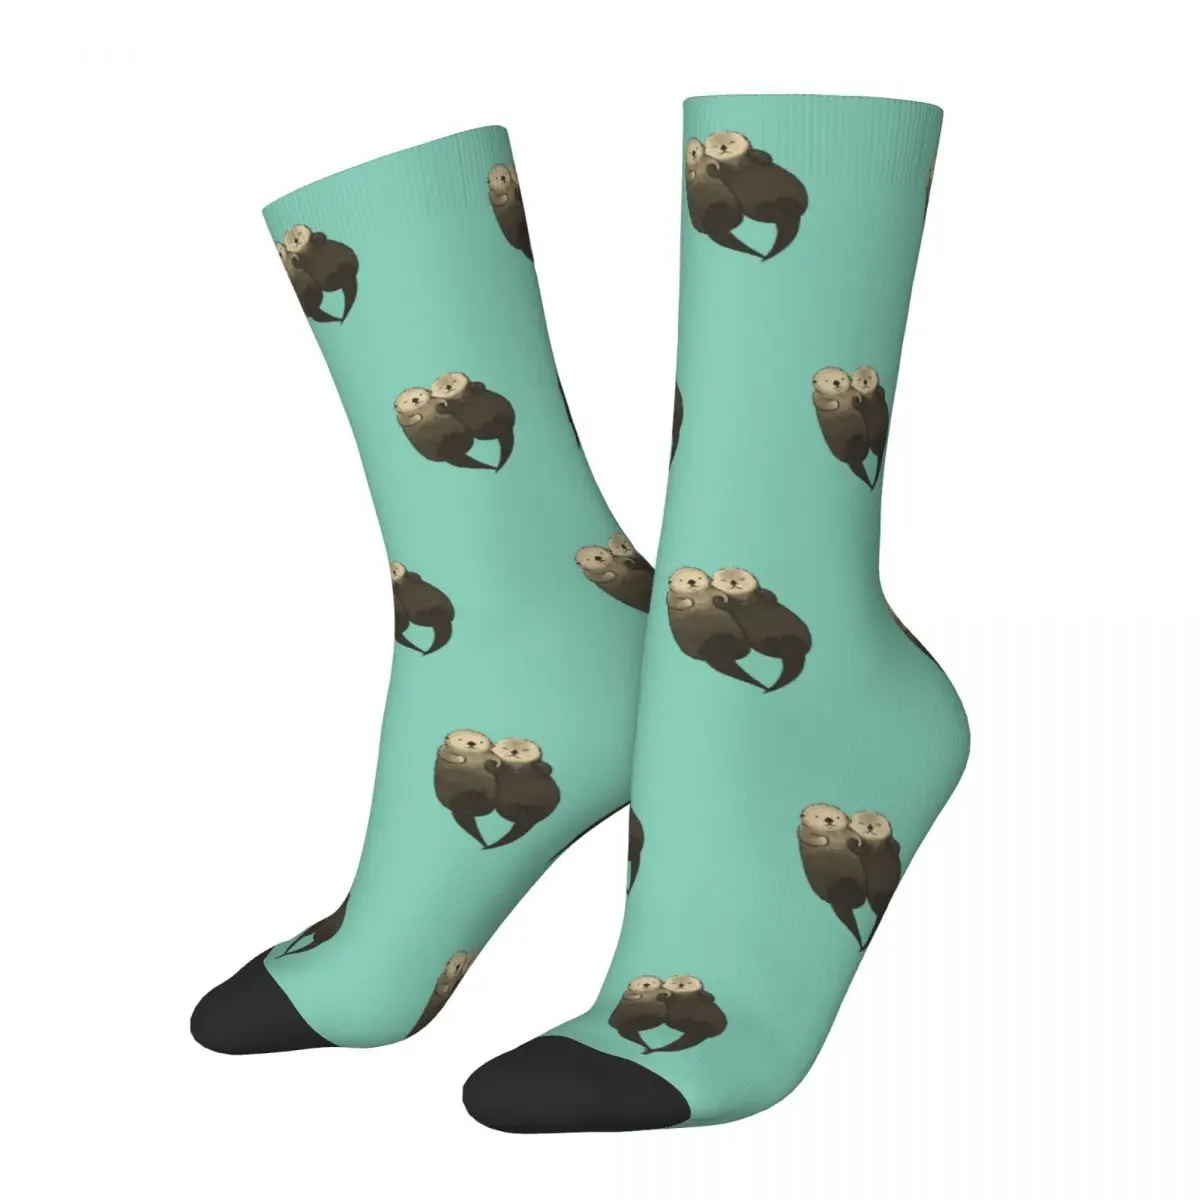 

All Seasons Crew Stockings Significant Otters - Otters Holding Hands Socks Hip Hop Long Socks Accessories for Men Women Gifts